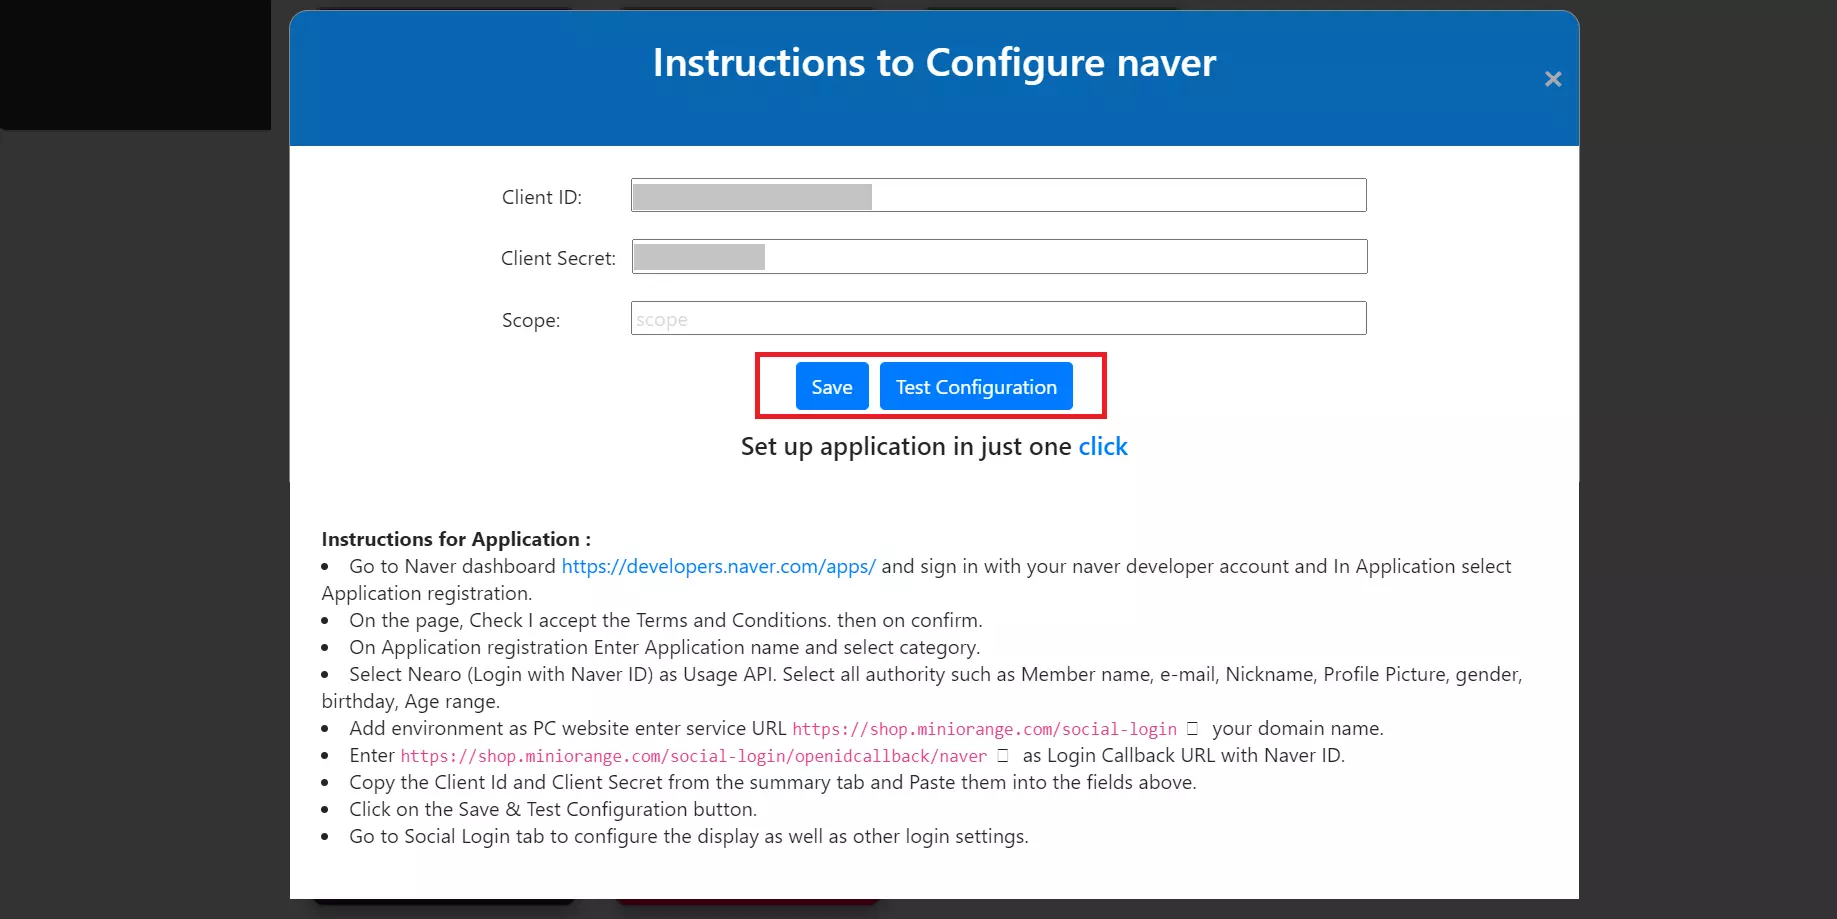 test configuration to login with Naver